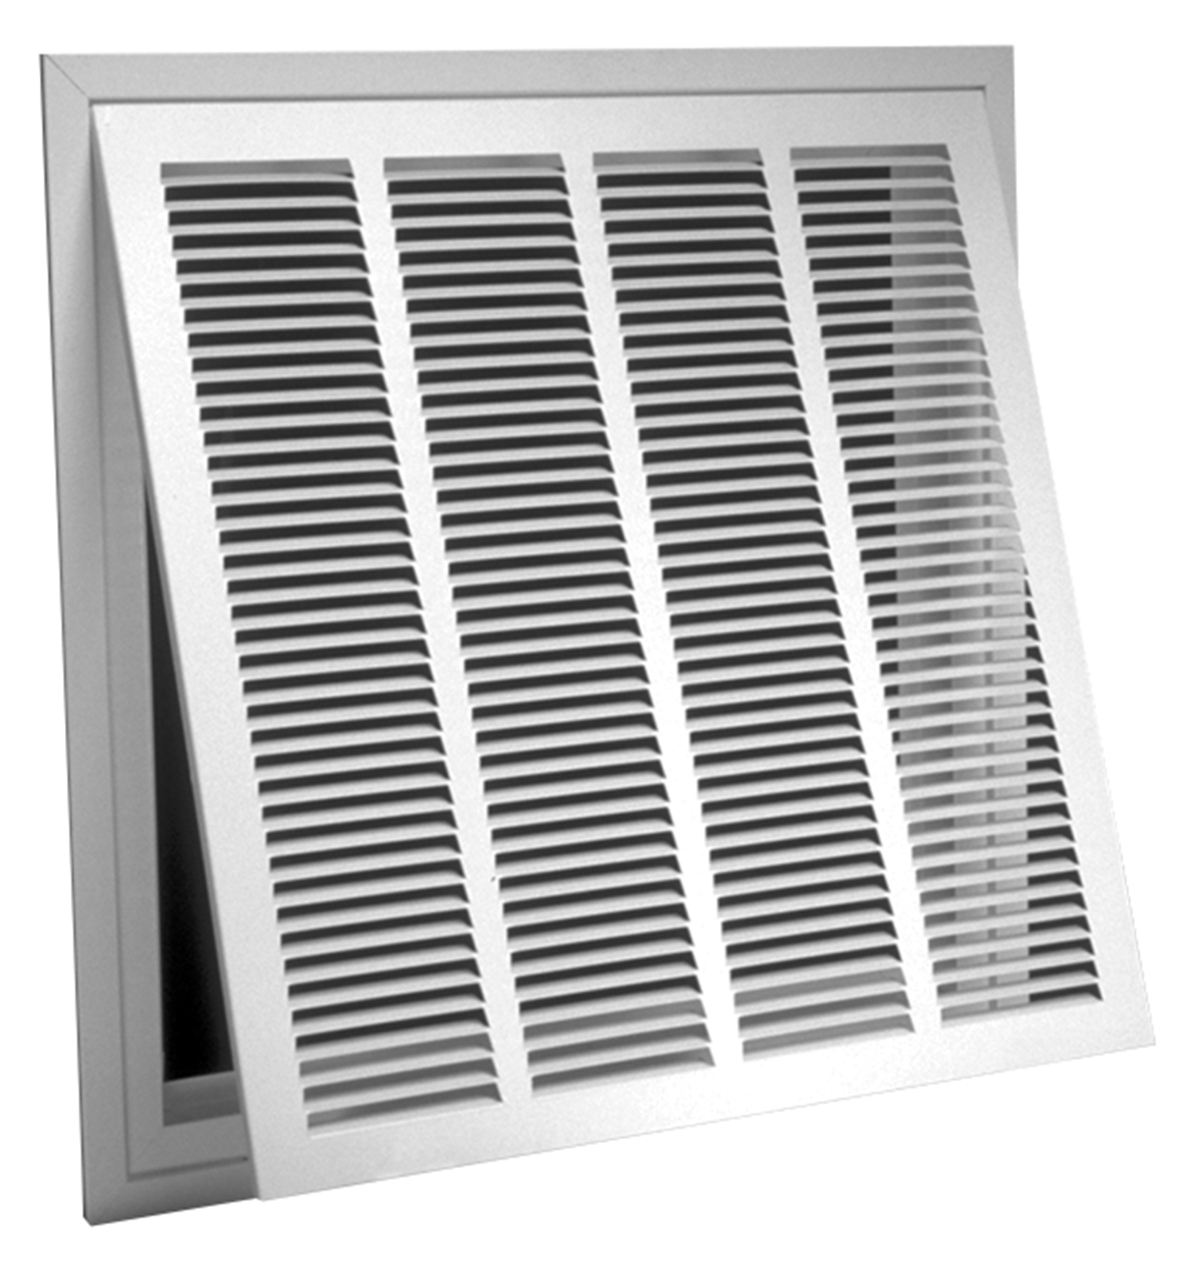 FILTER GRILLE T-BAR LAY-IN R-6